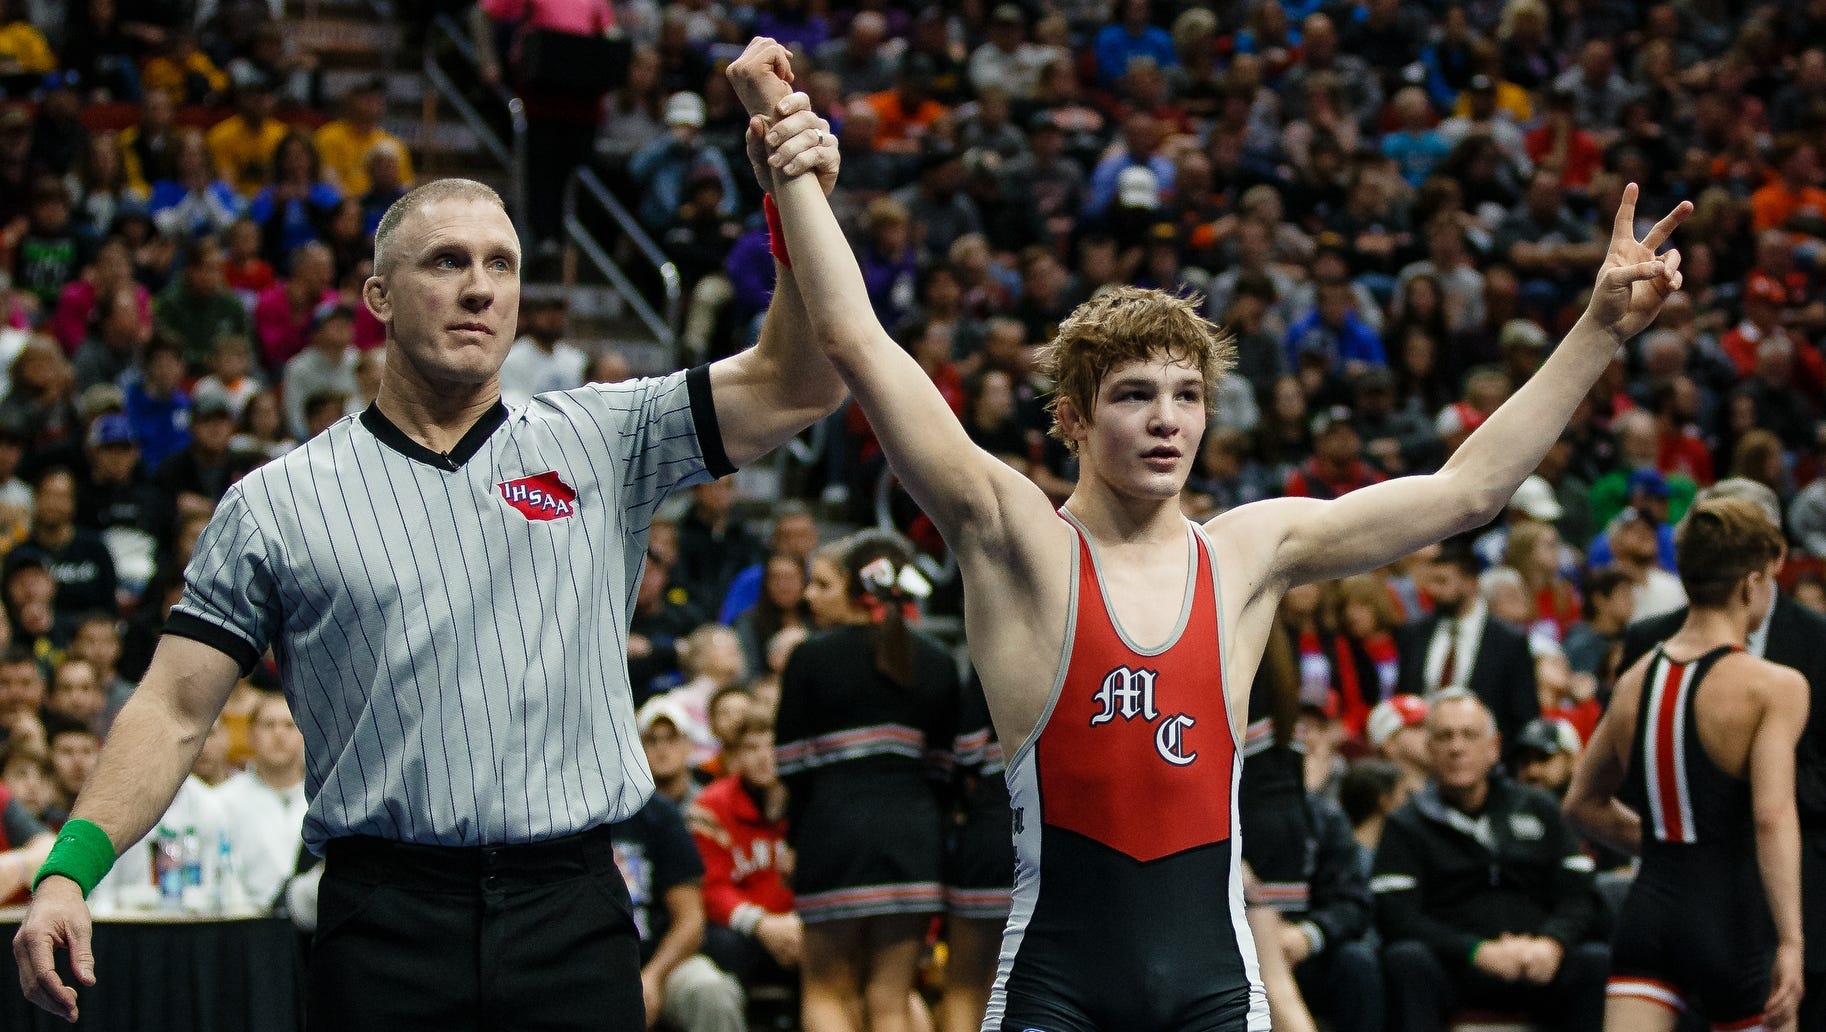 High school wrestling: Eight Iowa preps from 2020, 2021 classes to